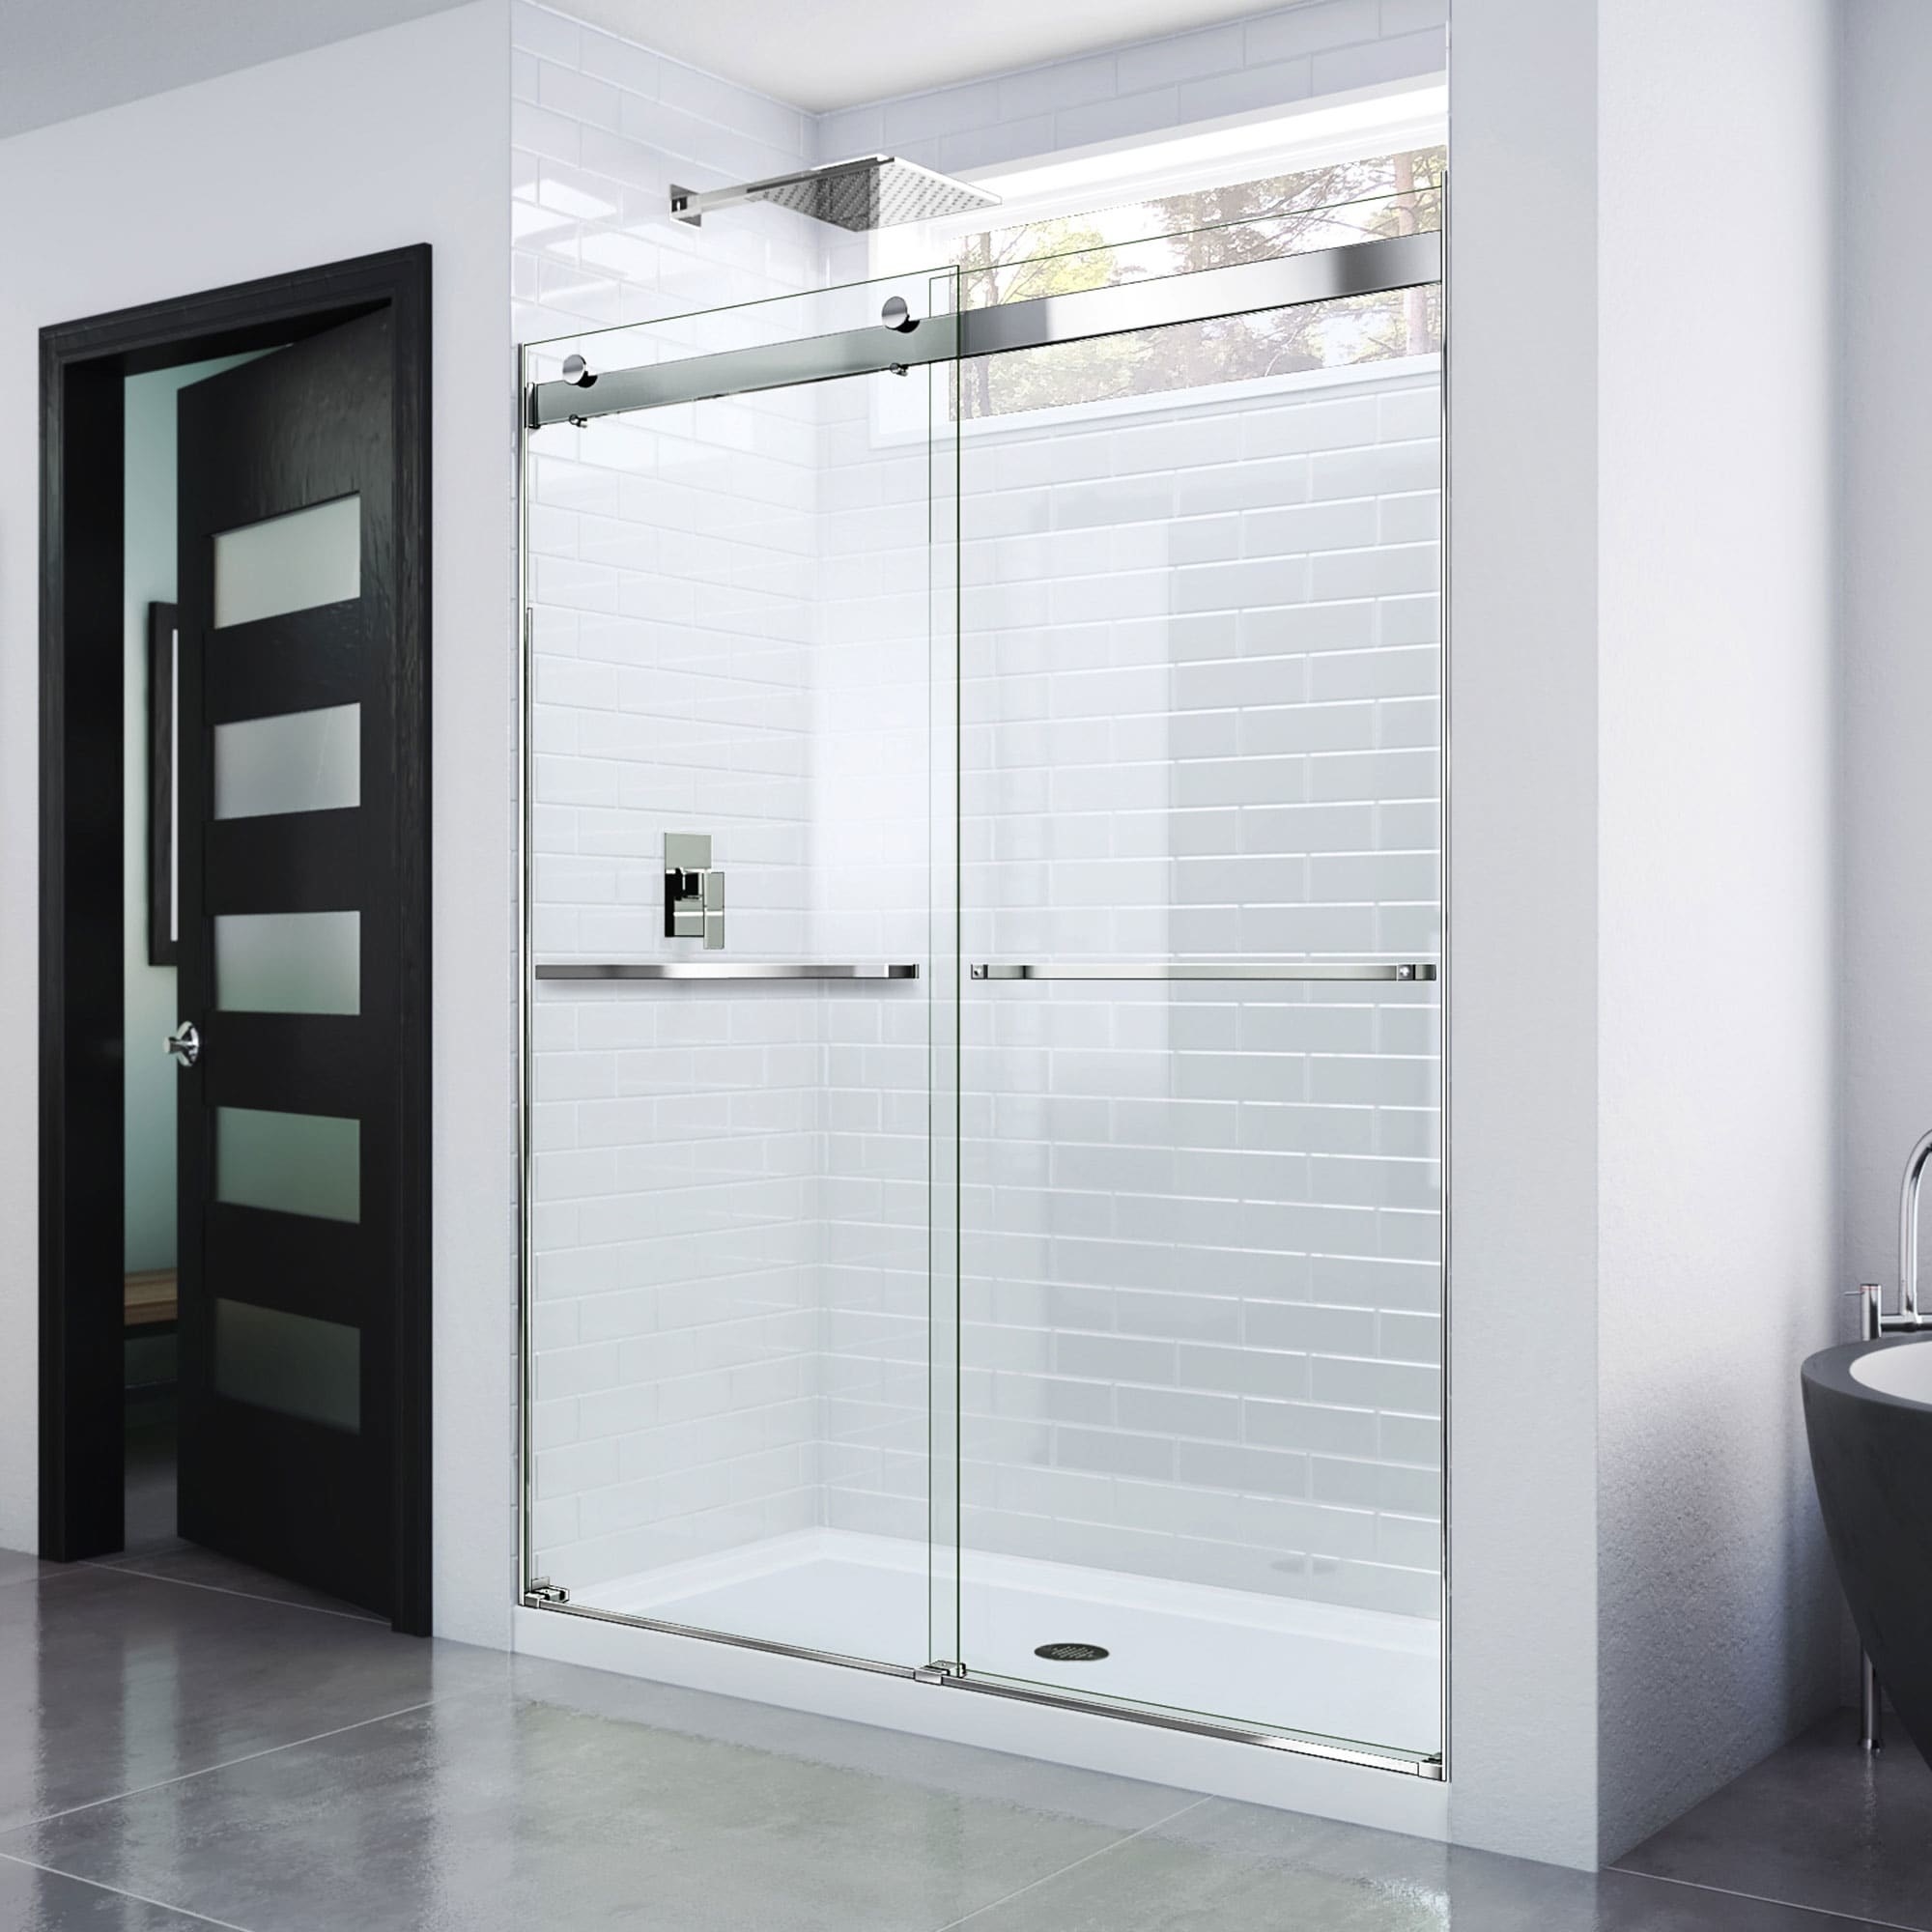 the glass shower door in a silver chrome finish